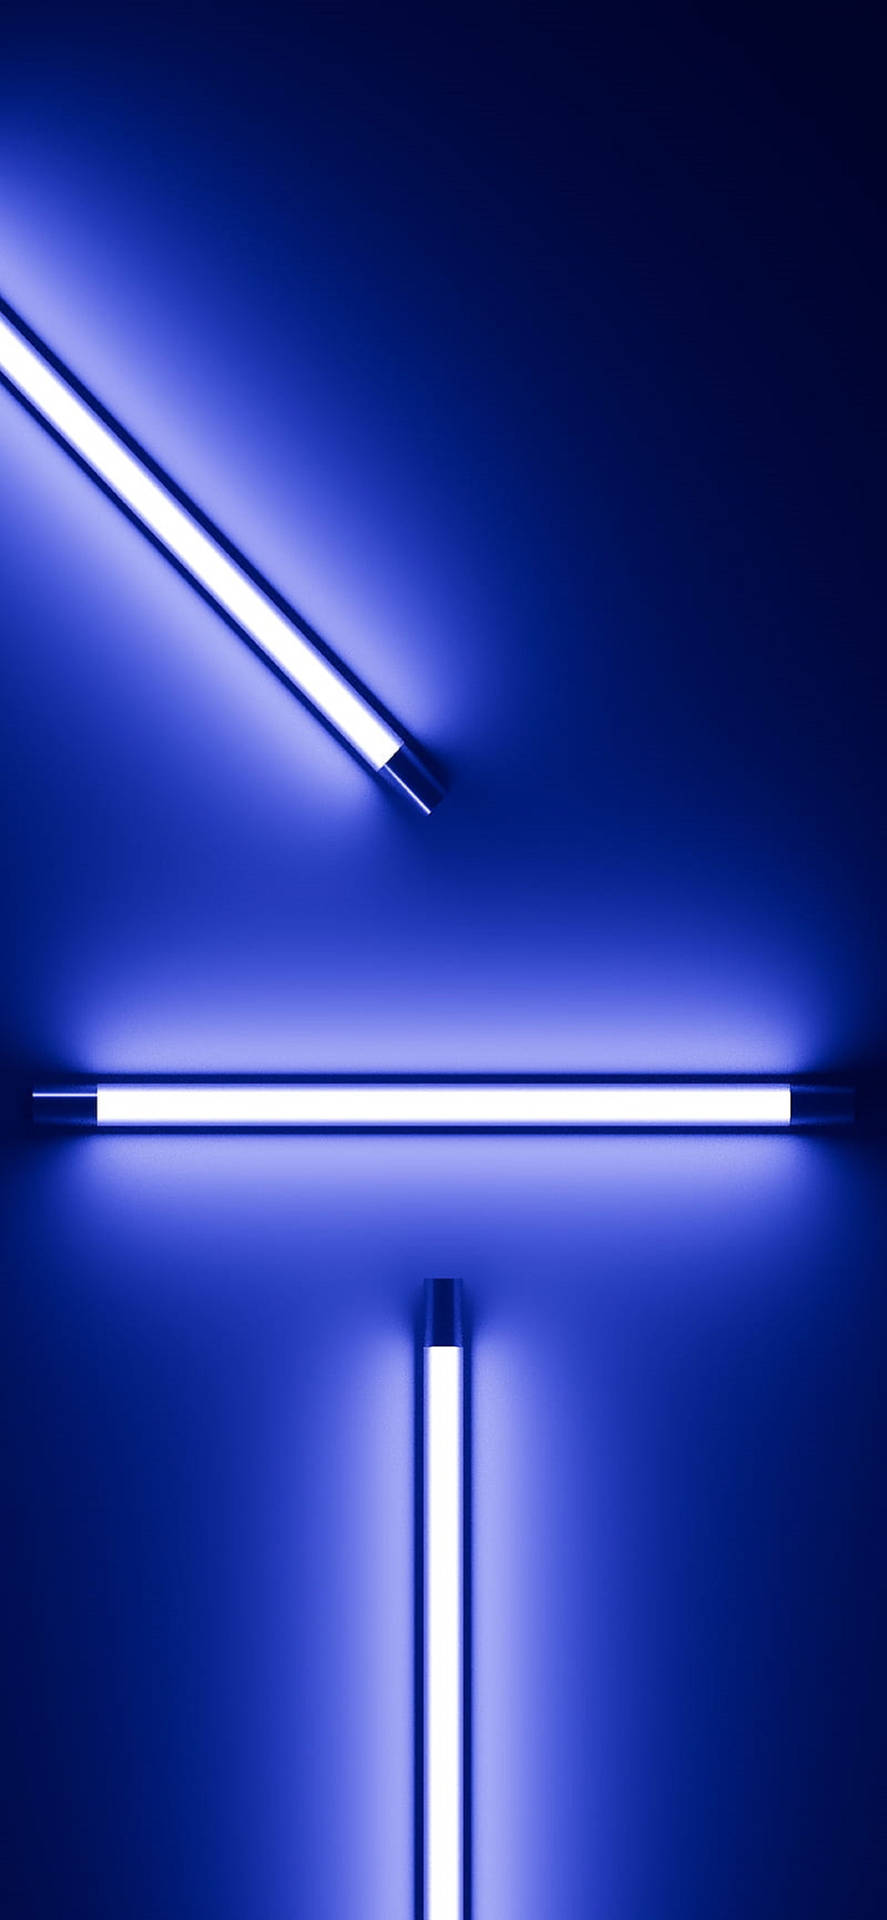 4k Neon Iphone Blue Lights In Wall Background